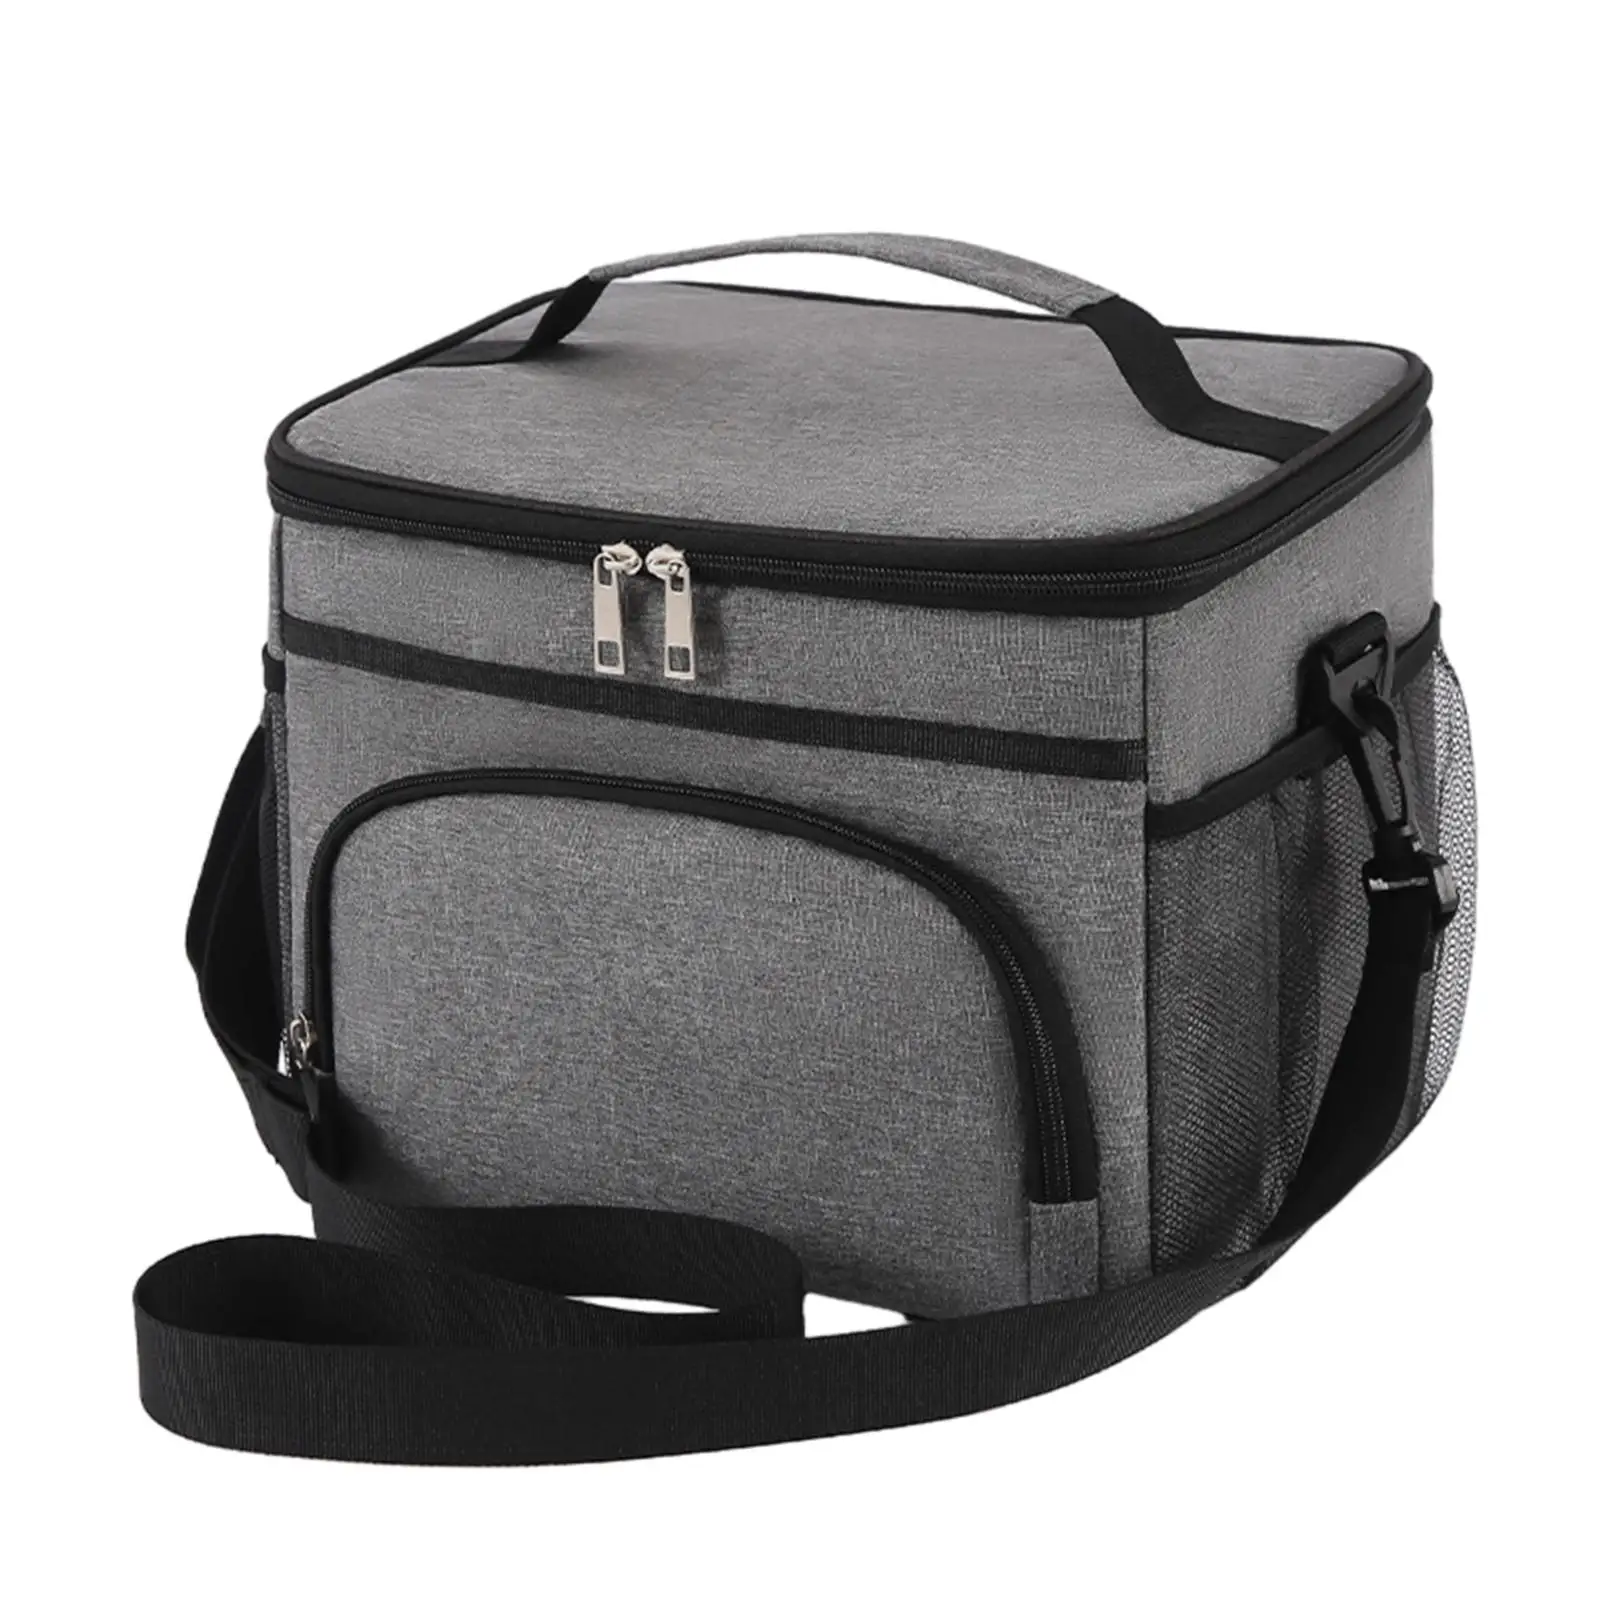 Food Bento Pouch Dinner Container with Adjustable Shoulder Strap Reusable Lunch Box for Adults Beach Office Men Picnic